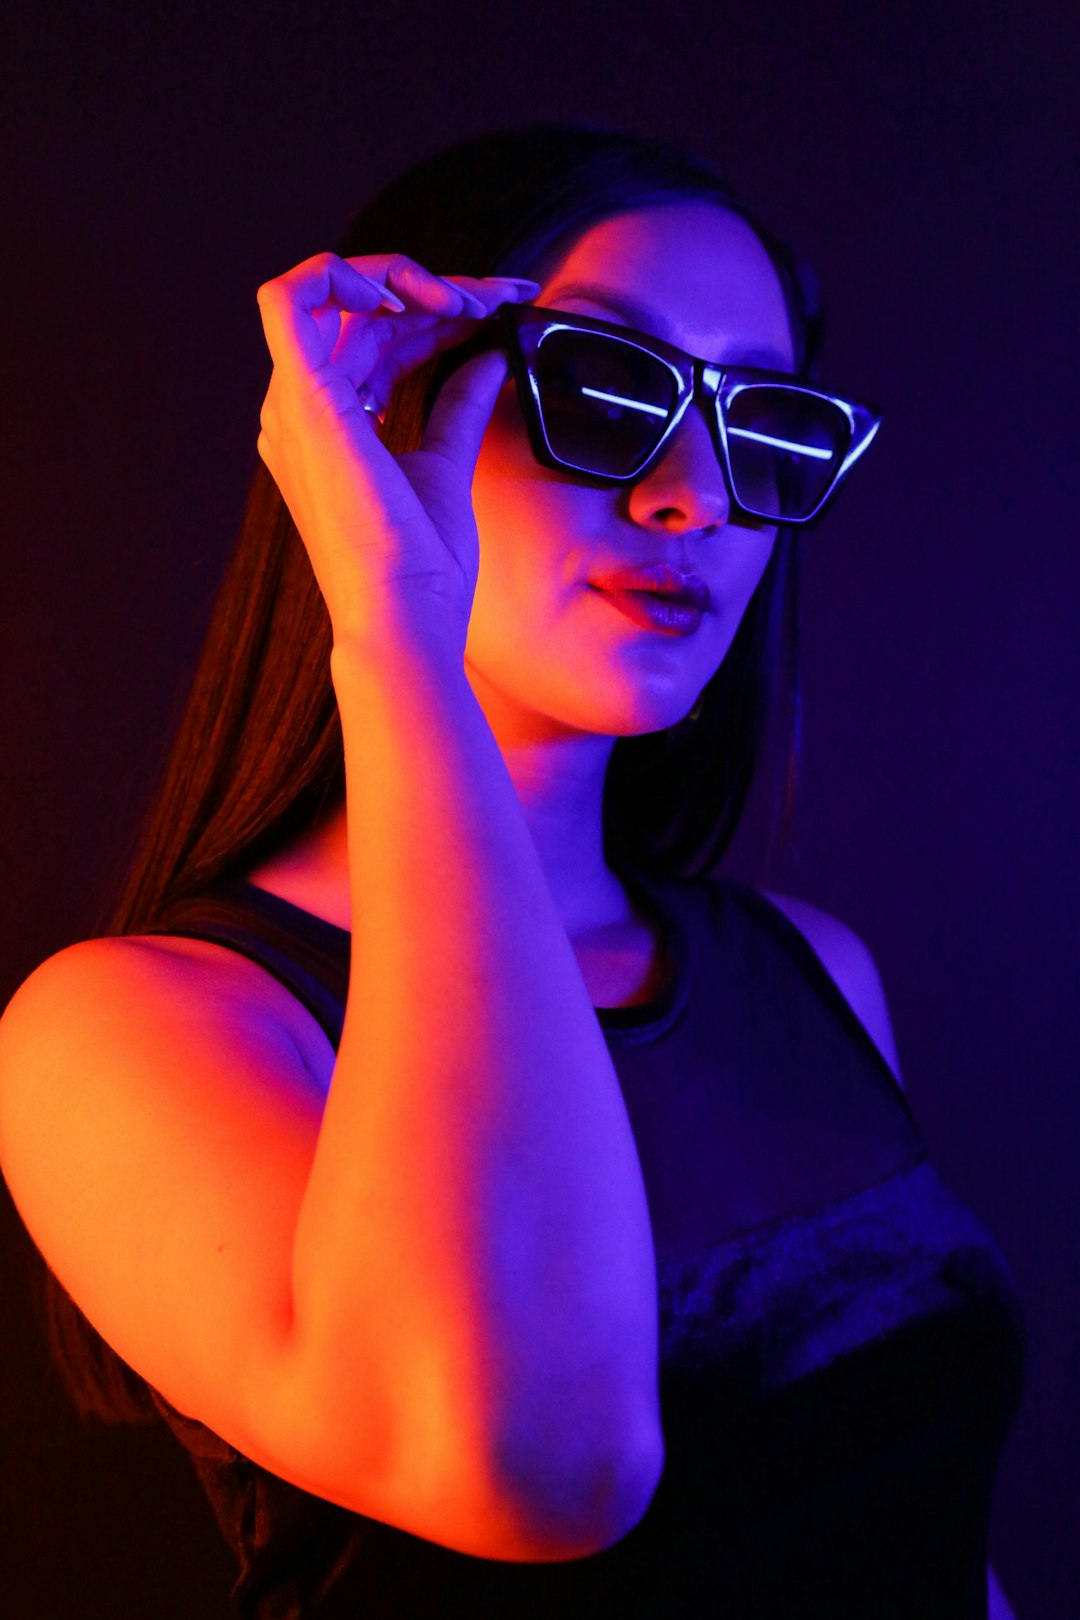 Woman in black dress with sun glasses